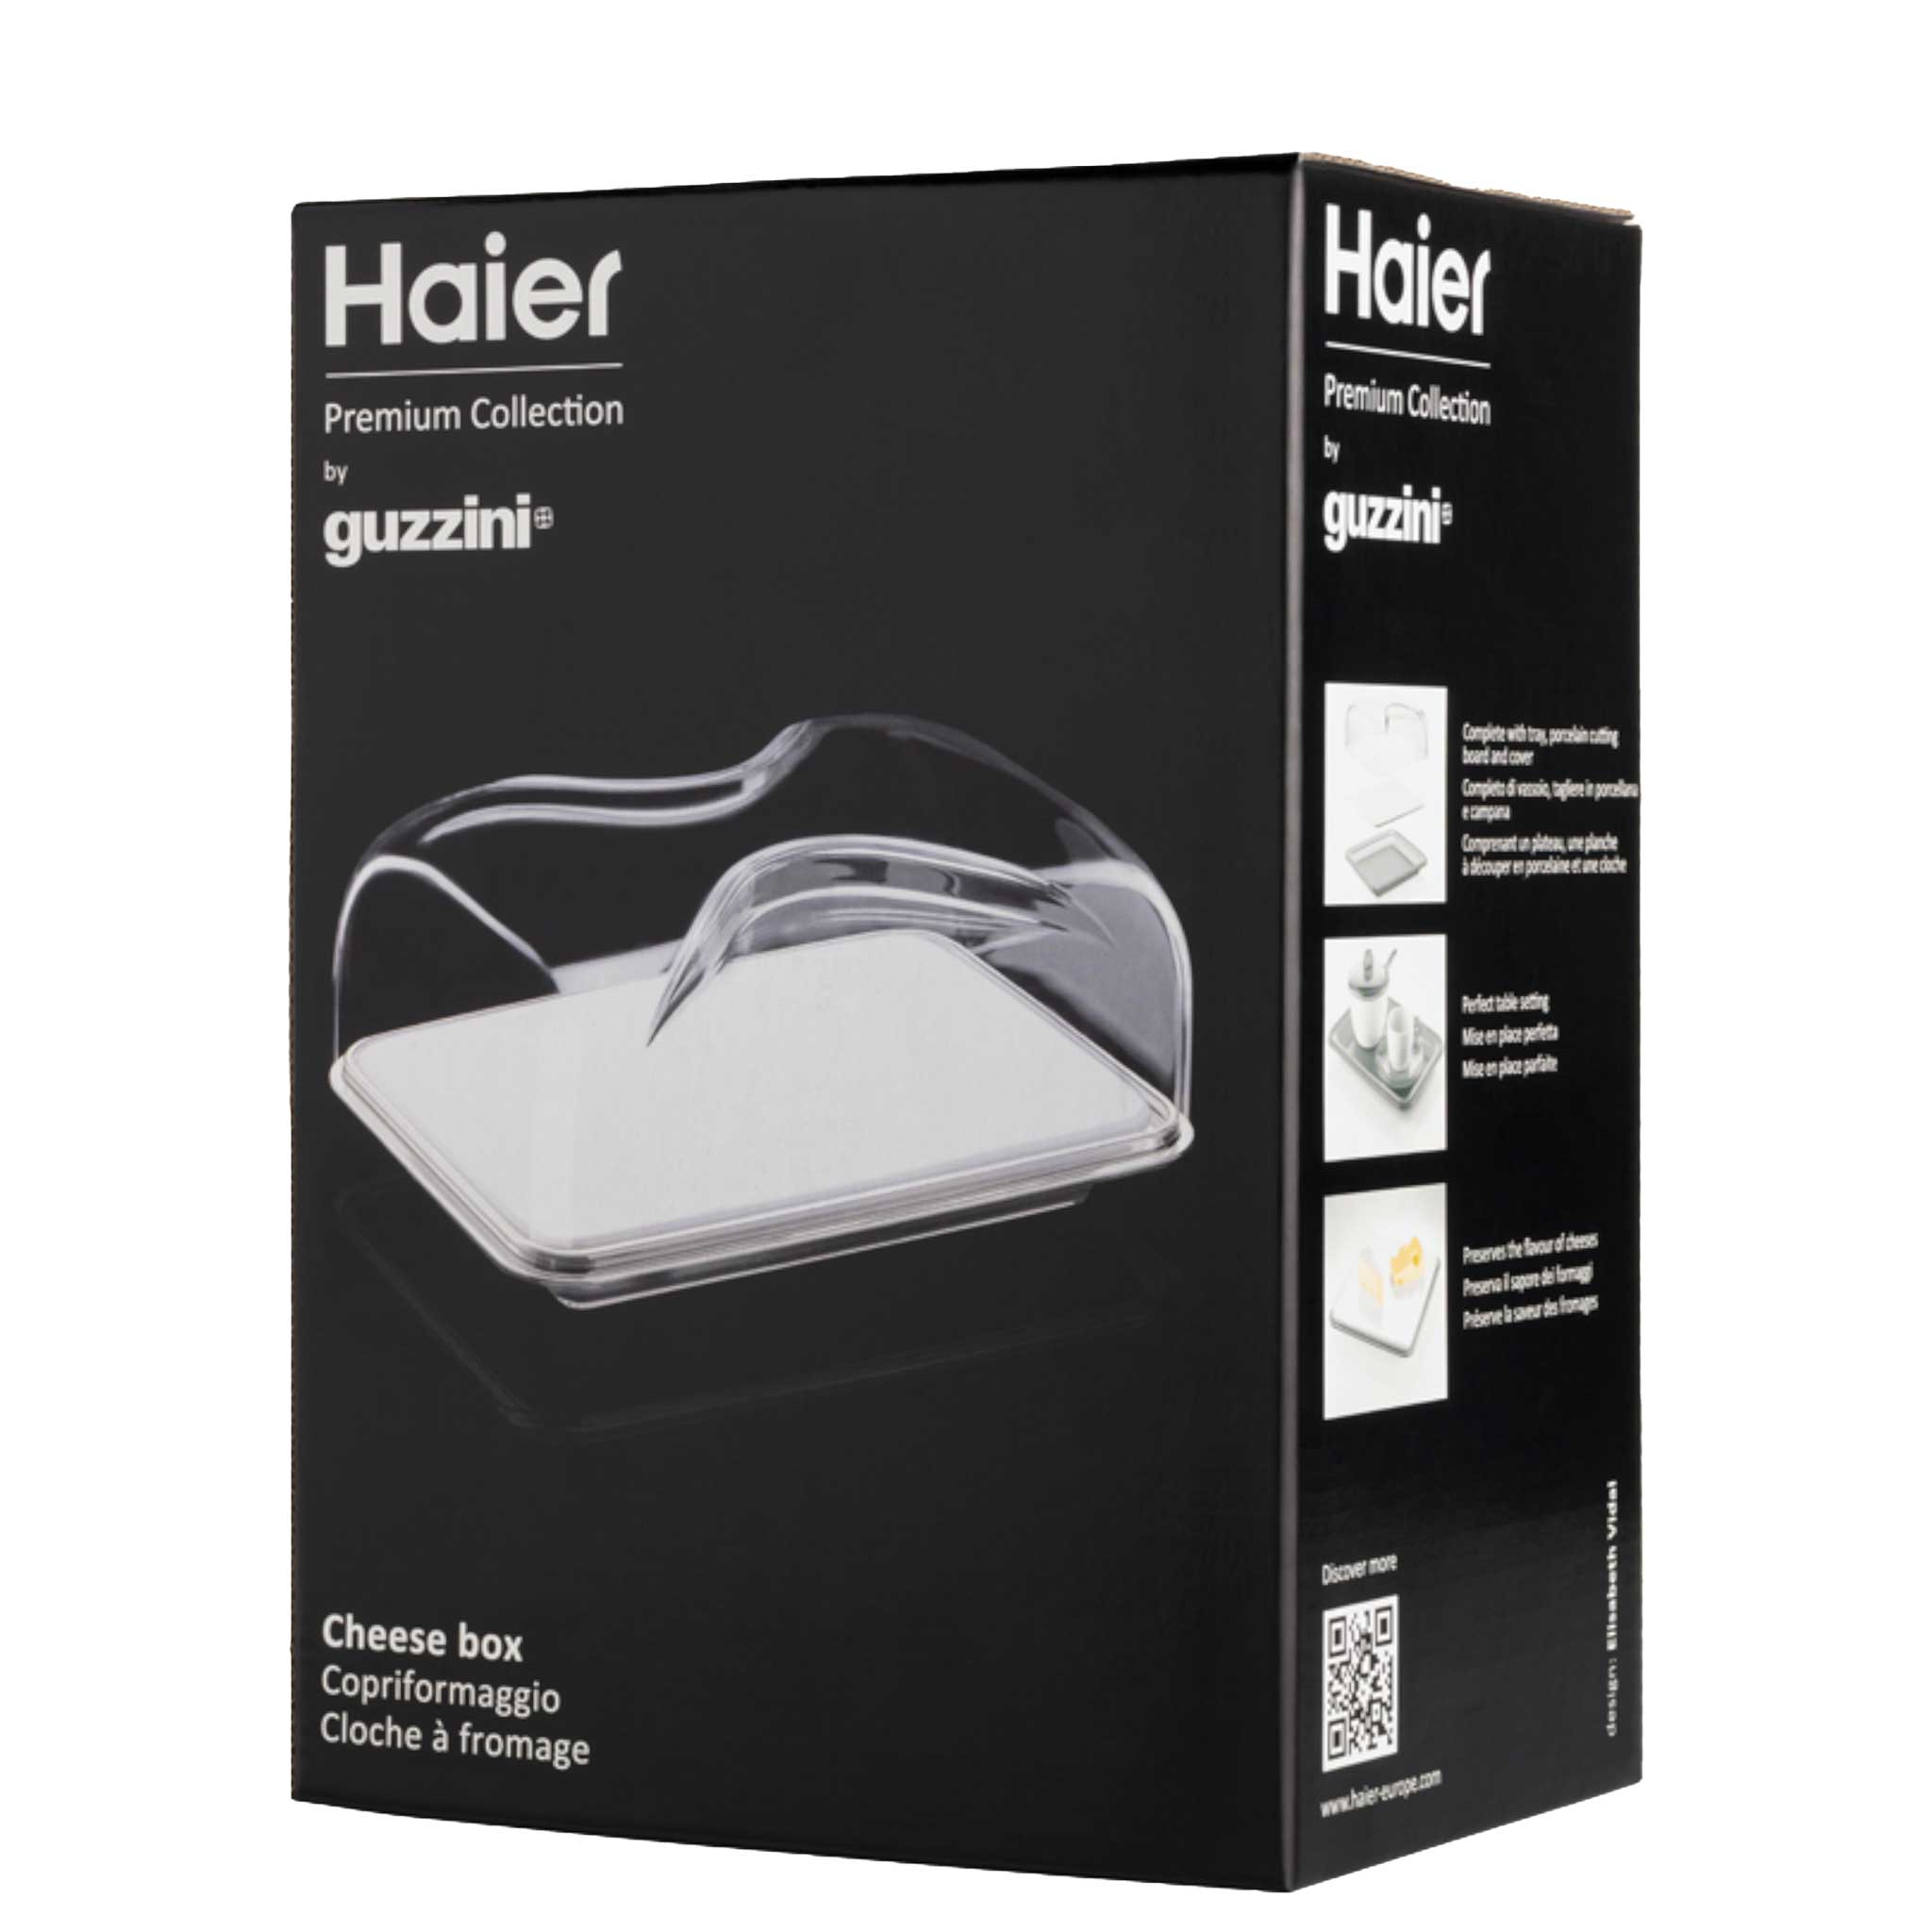 Haier by Guzzini Elegant Cheesebox with Tray, Procelain Cutting Board and Lid